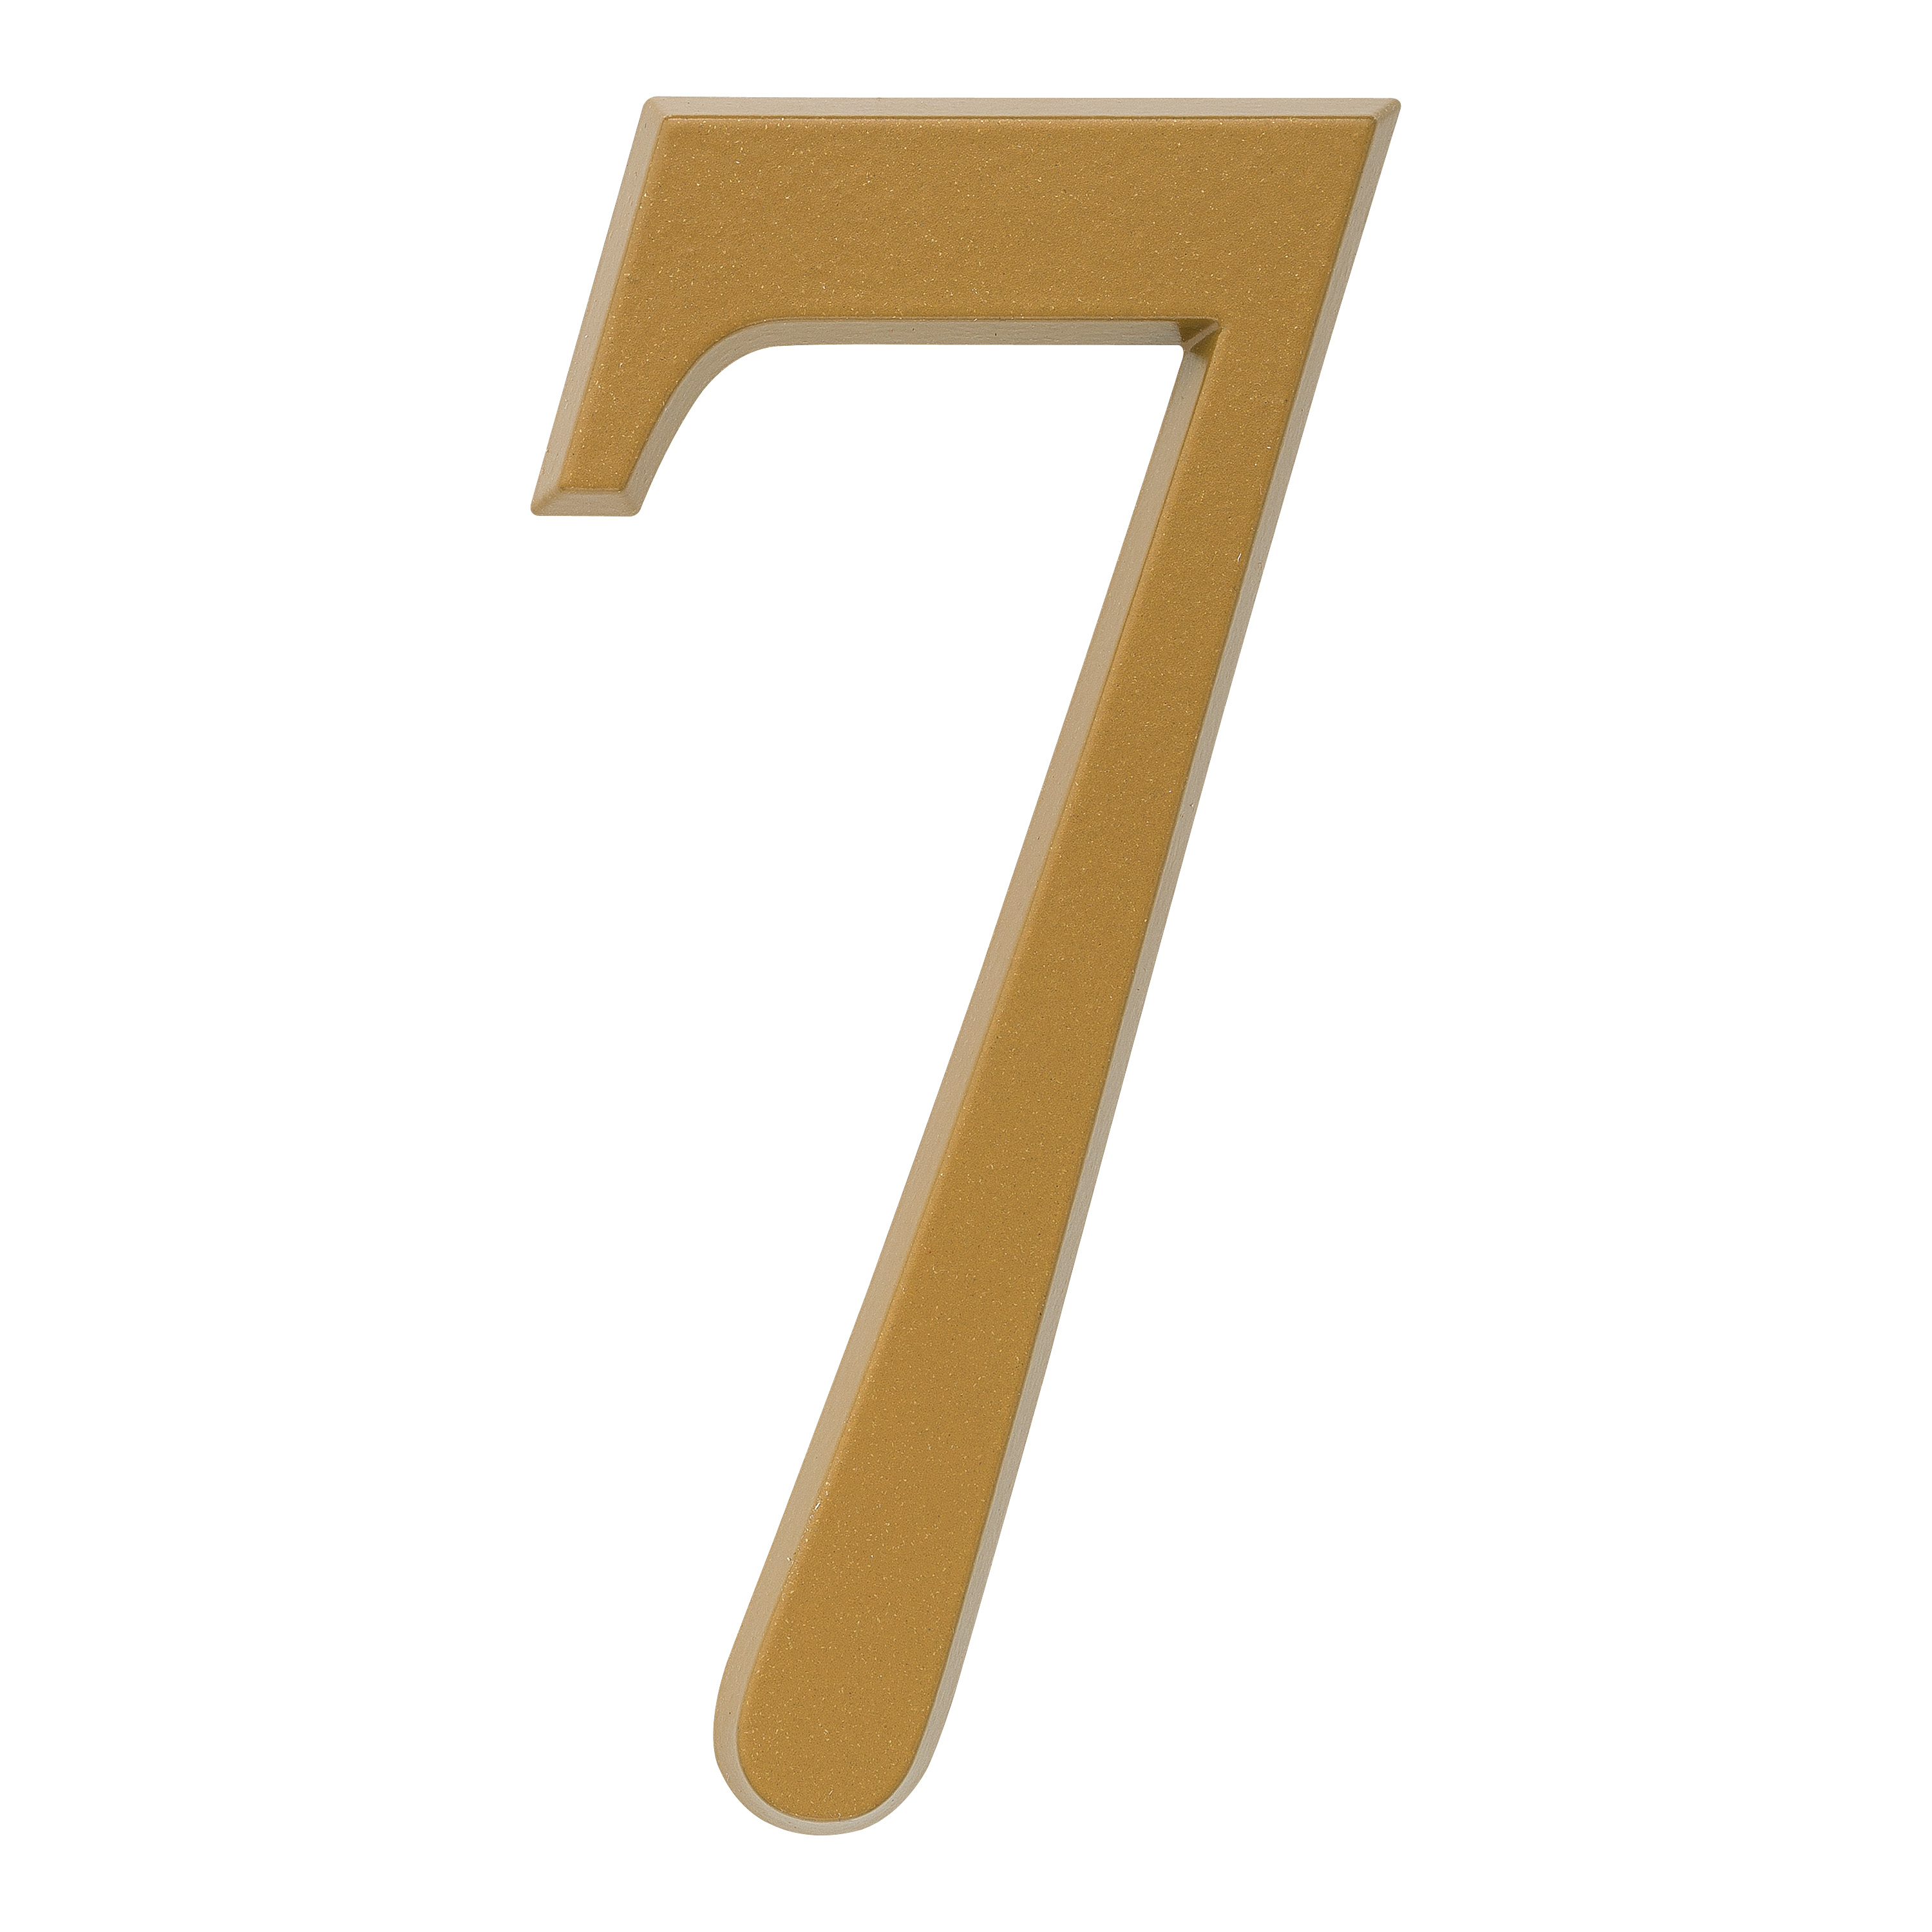 Whitehall 4.75 inch Gold House Address Number - 7